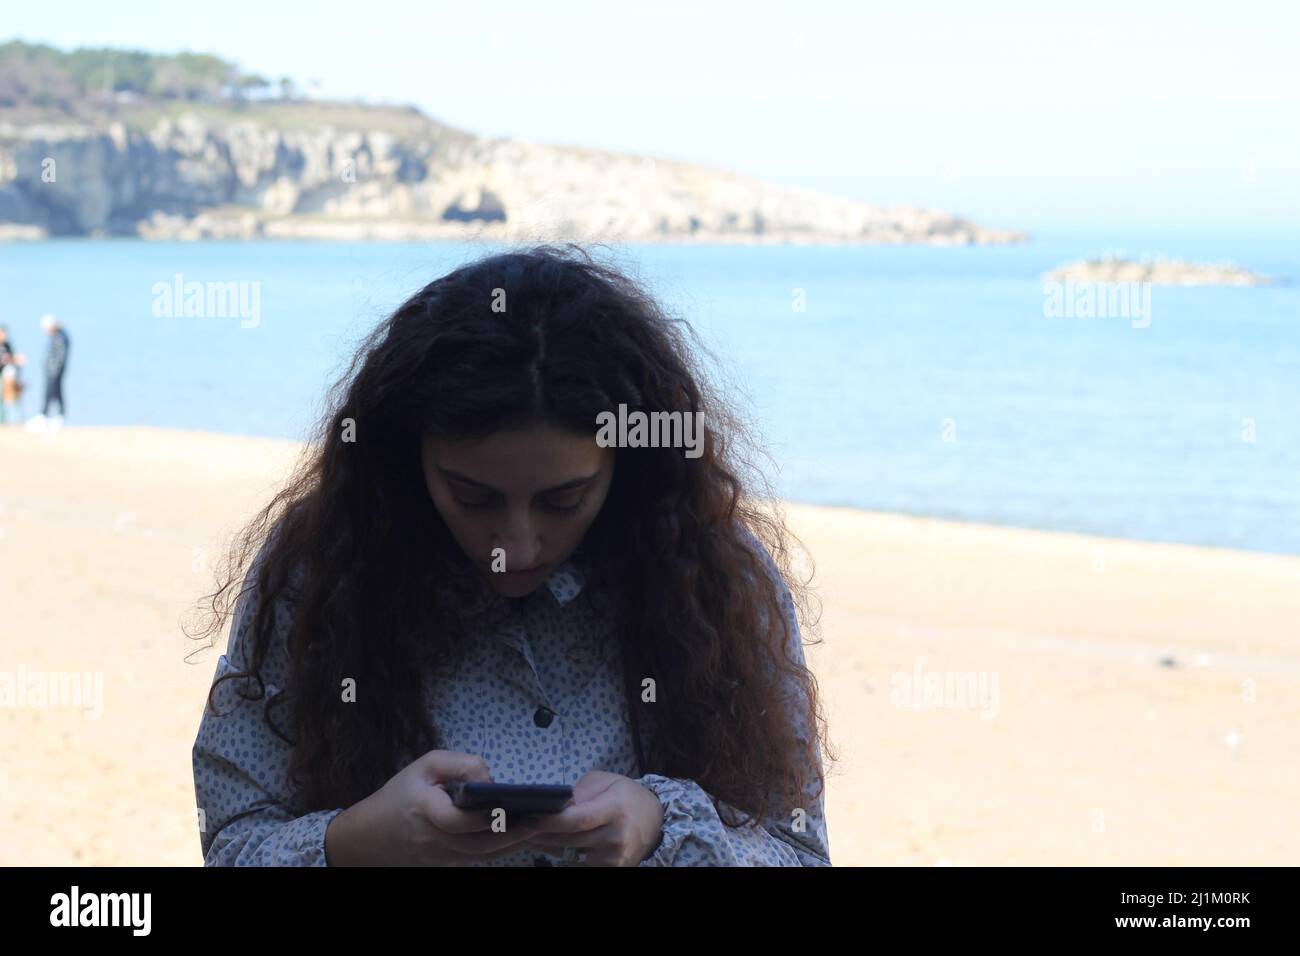 Istanbul,Turkey- February 12 2022: A beach in Sile, sunny day trip on the seaside, traveler’s aspect. Stock Photo